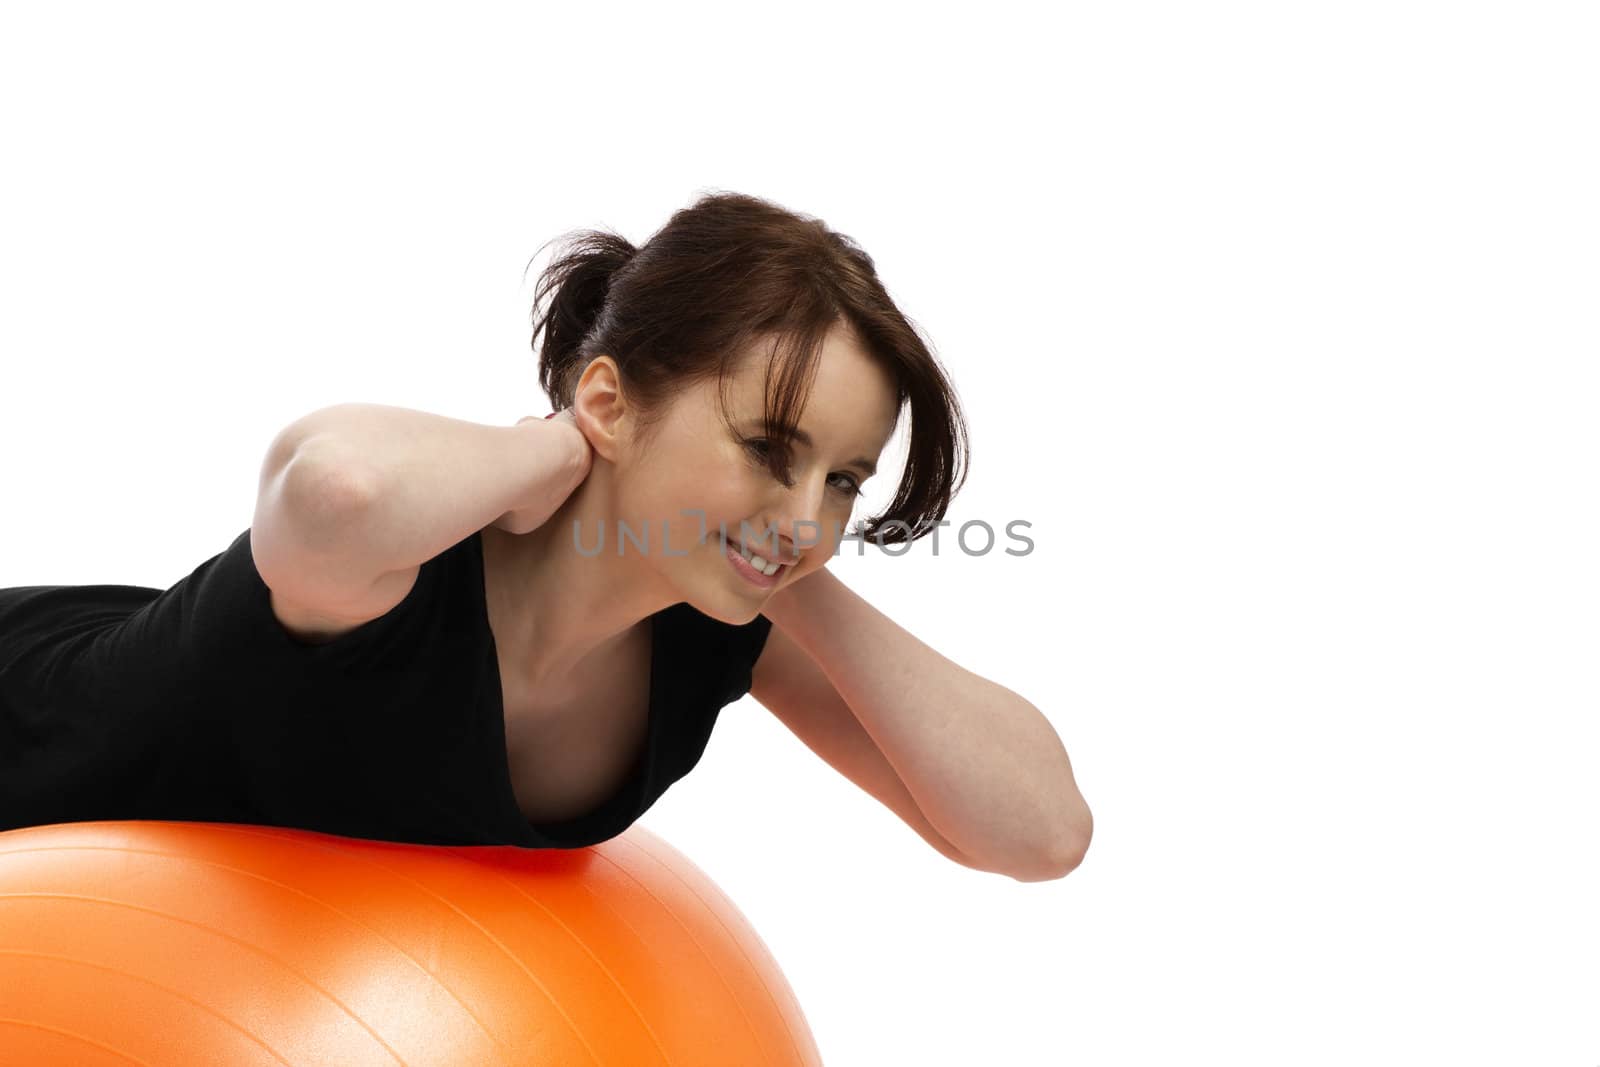 young woman exercising with orange exercise ball